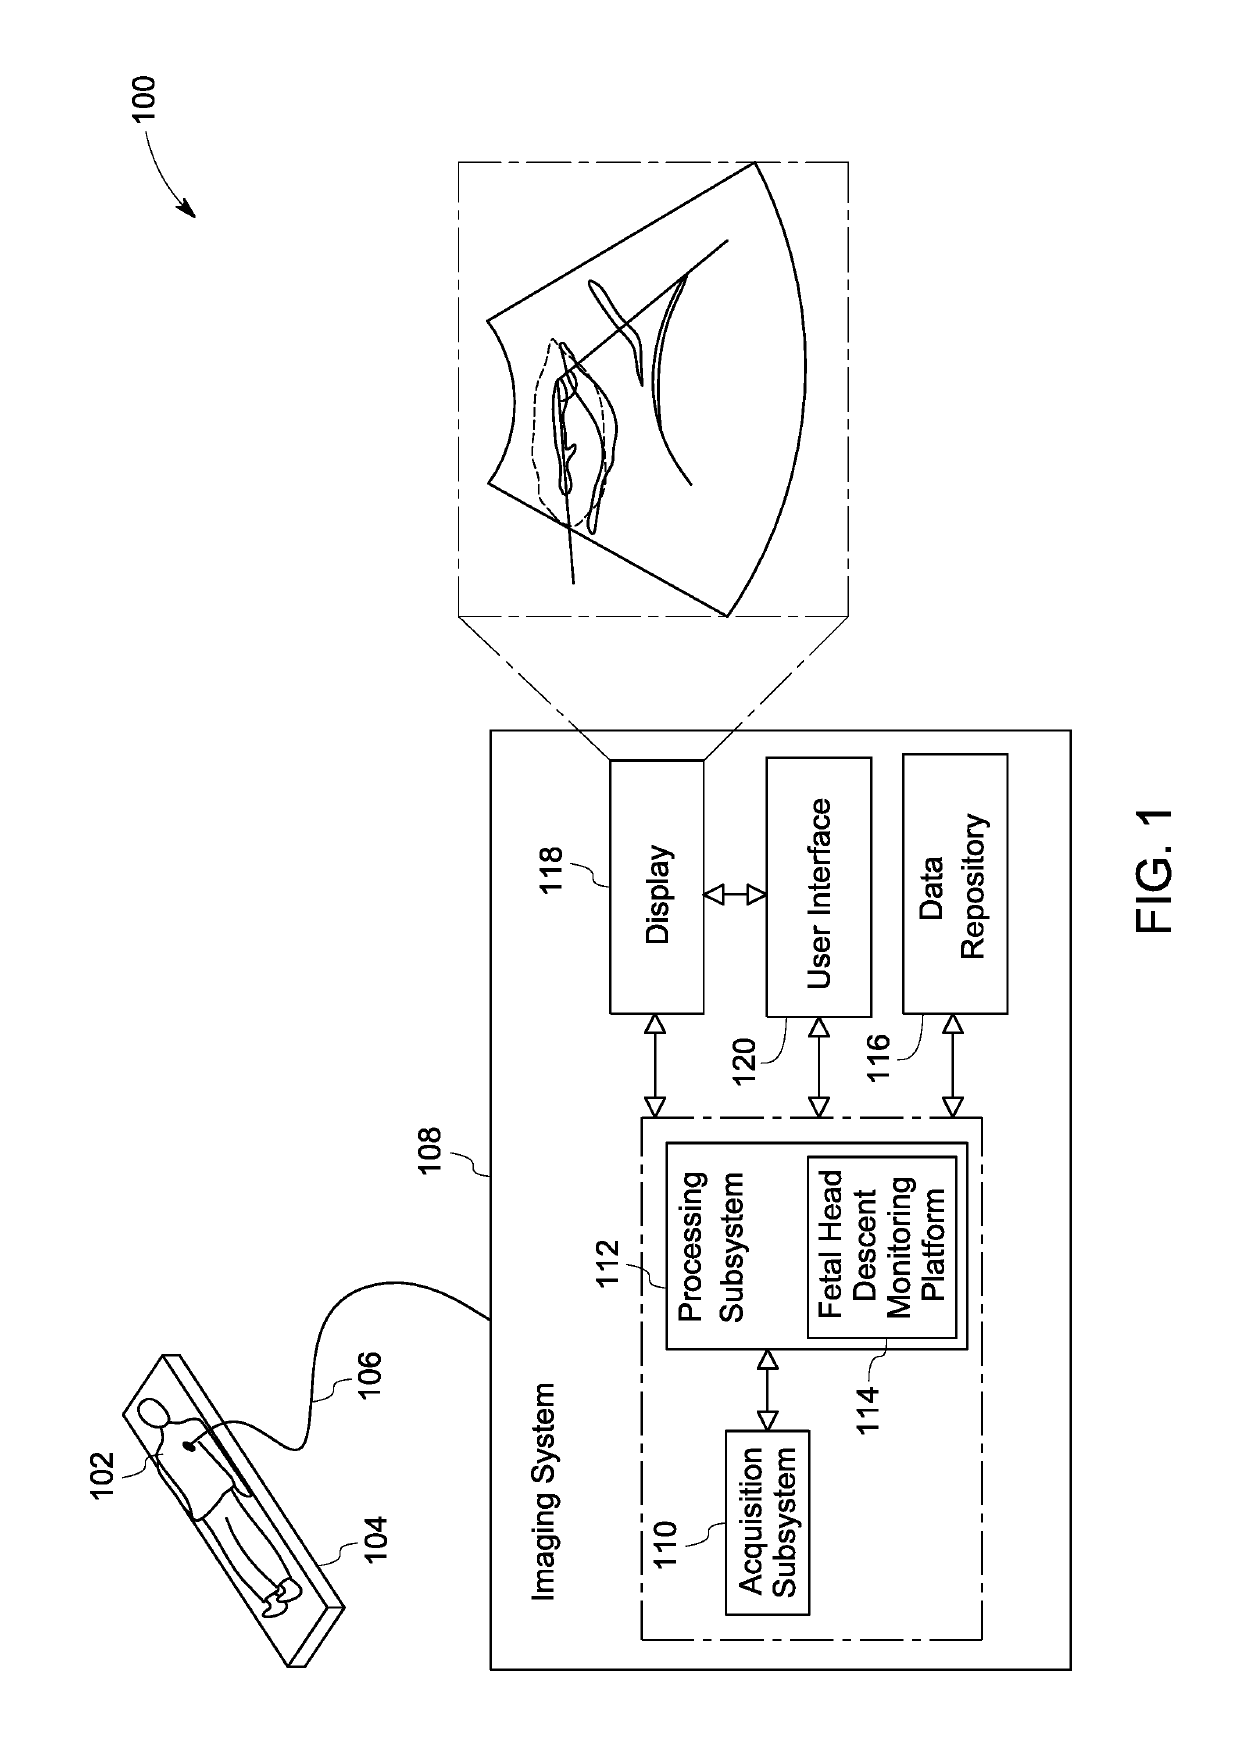 System and method for automated monitoring of fetal head descent during labor